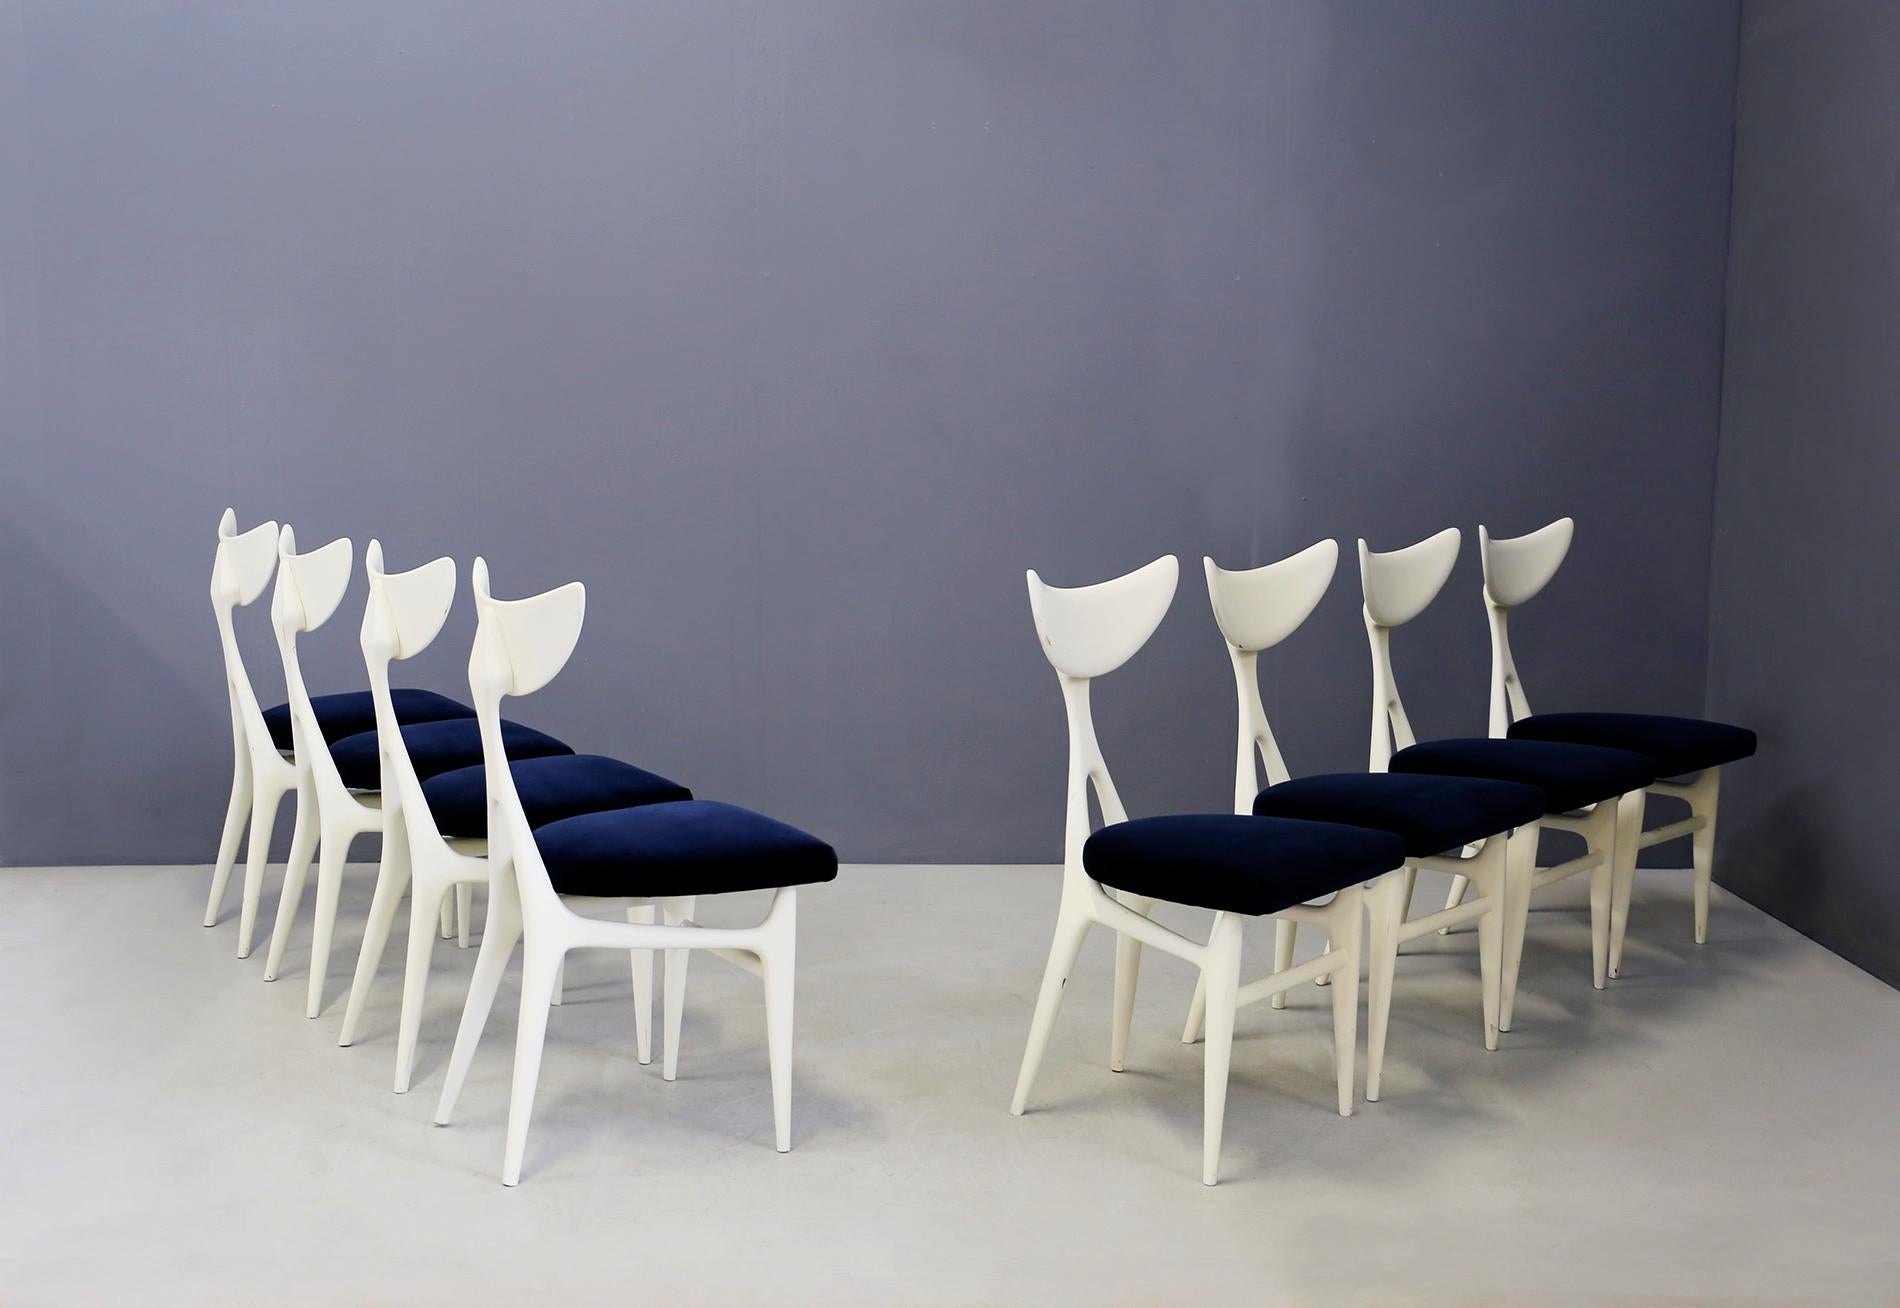 Sculptural set of eight Italian chairs designed by architects Ennio Canino and Viviana Rizzi for Arredamenti Roma, 1954. The set is made of mahogany white paint. Its seat is again lined in blue velvet. The chairs have an anthropomorphic shape almost